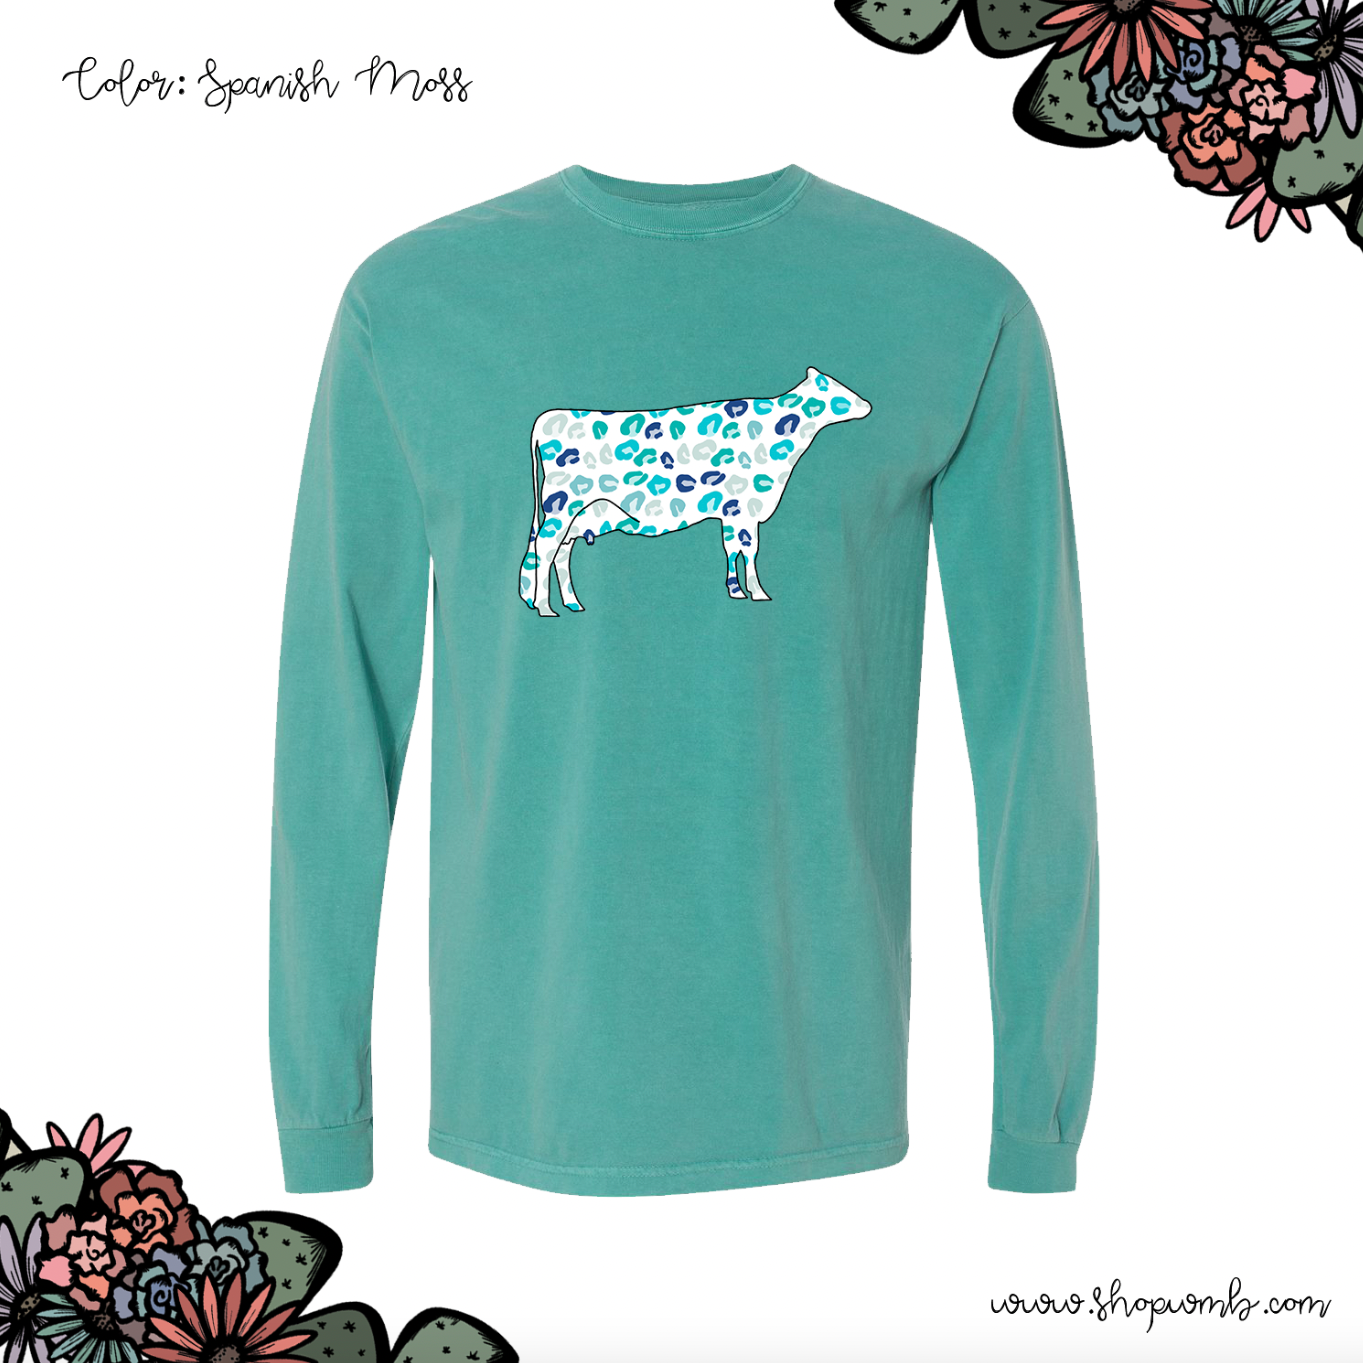 Turquoise Cheetah Dairy Cow LONG SLEEVE T-Shirt (S-3XL) - Multiple Colors!